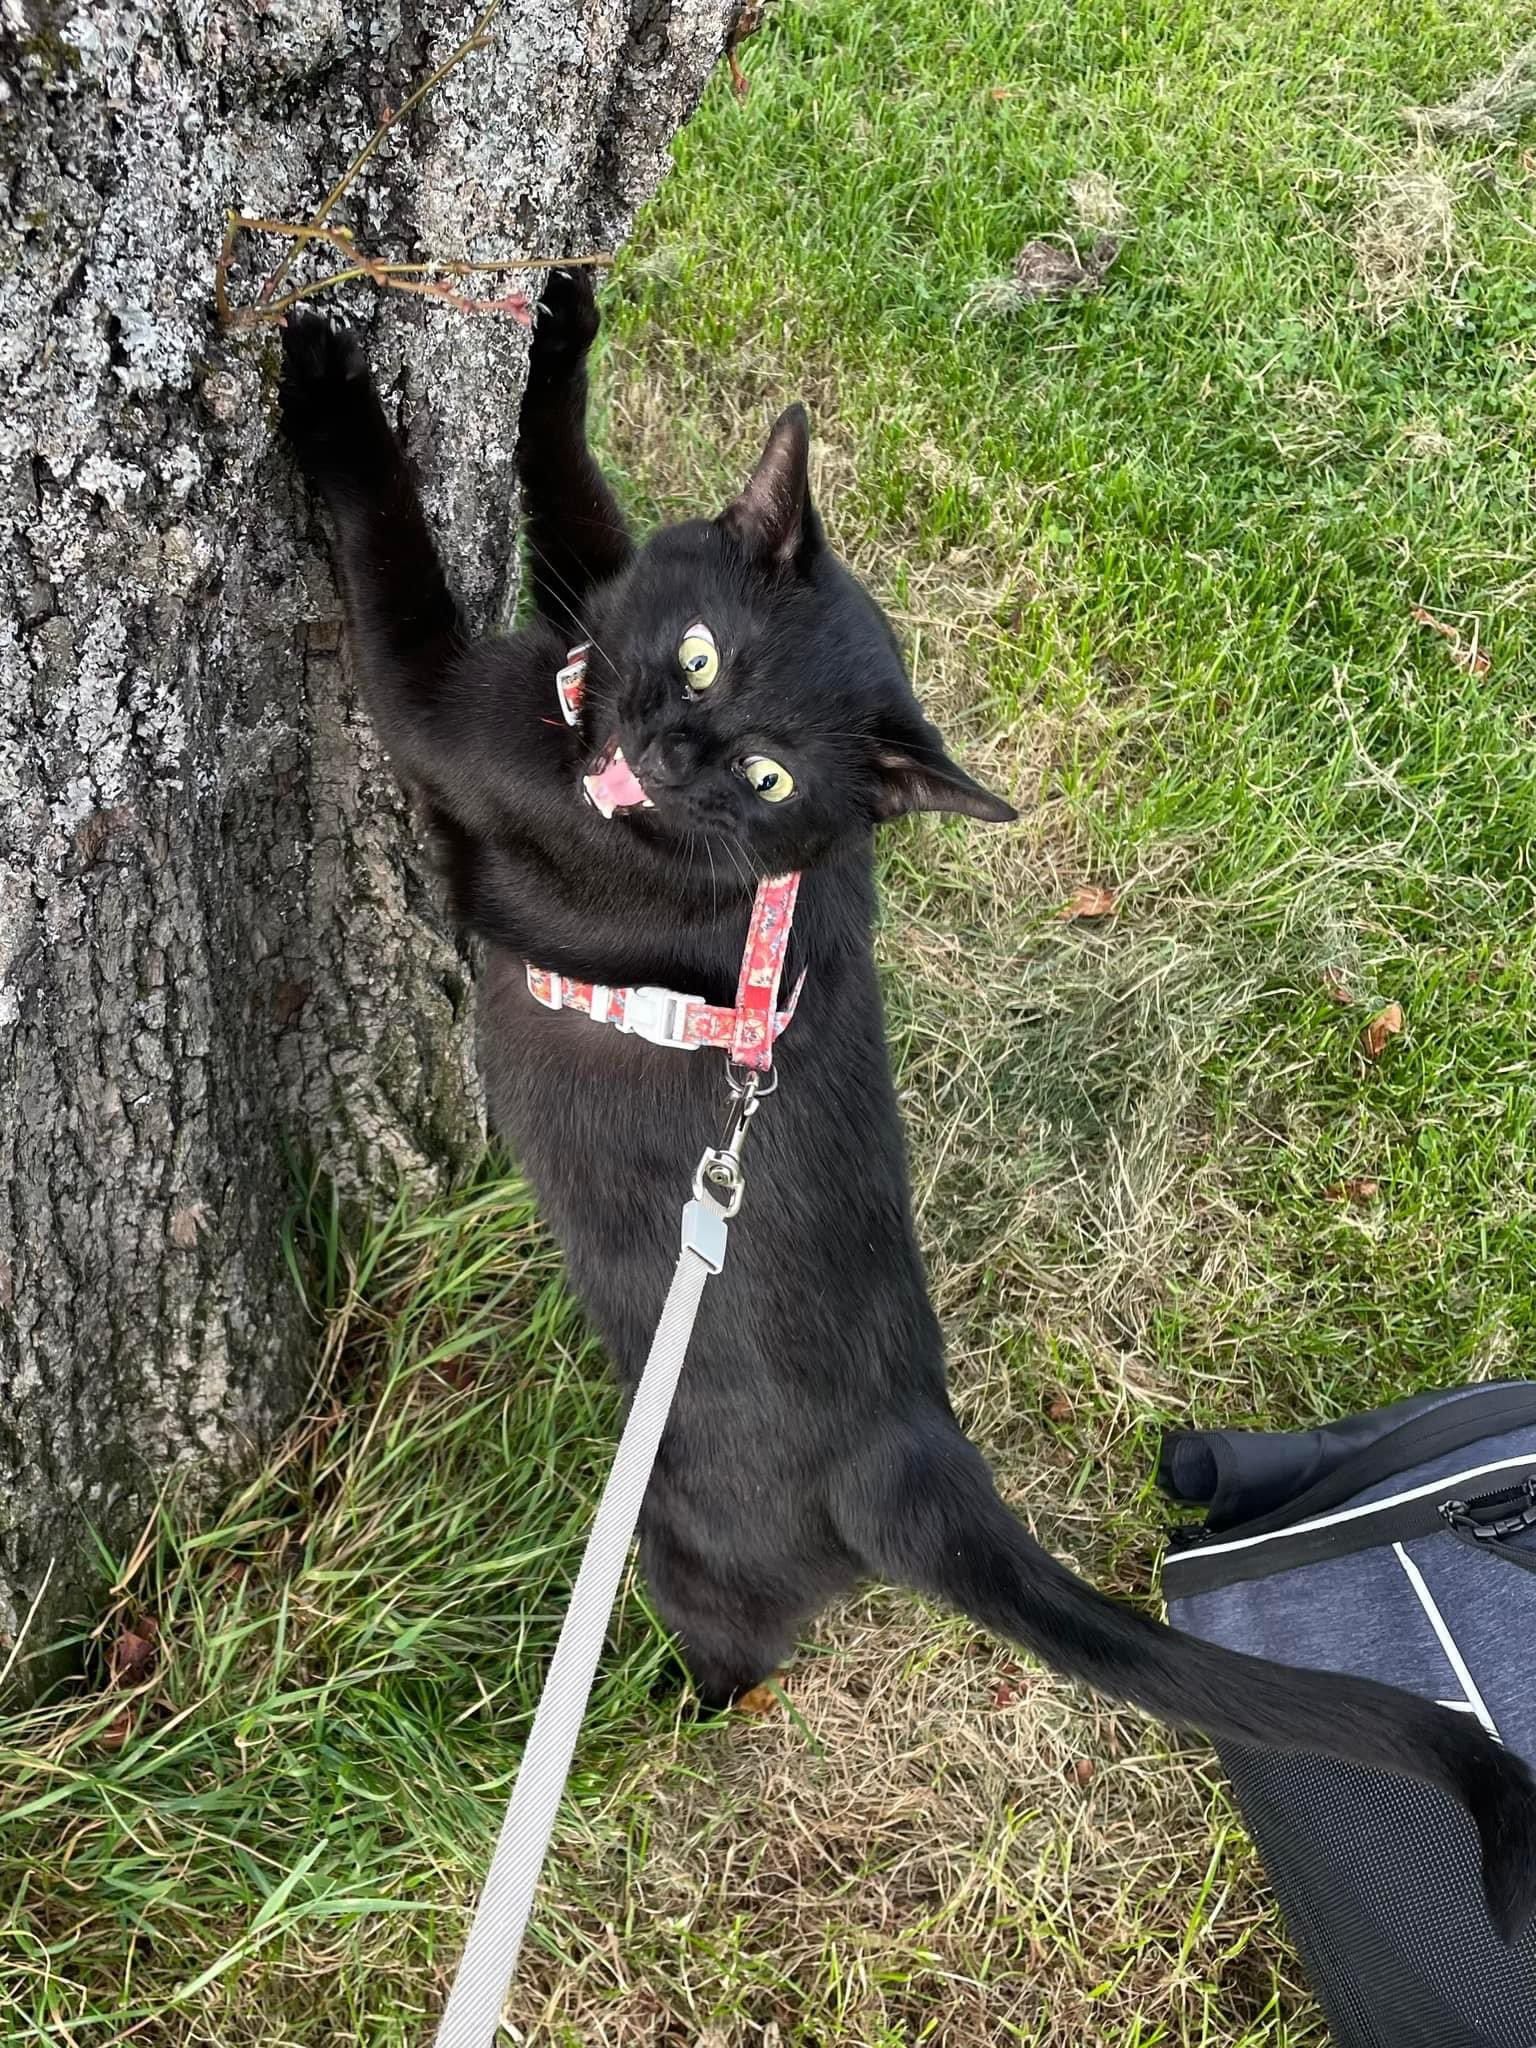 Kevin the cat's first time outside